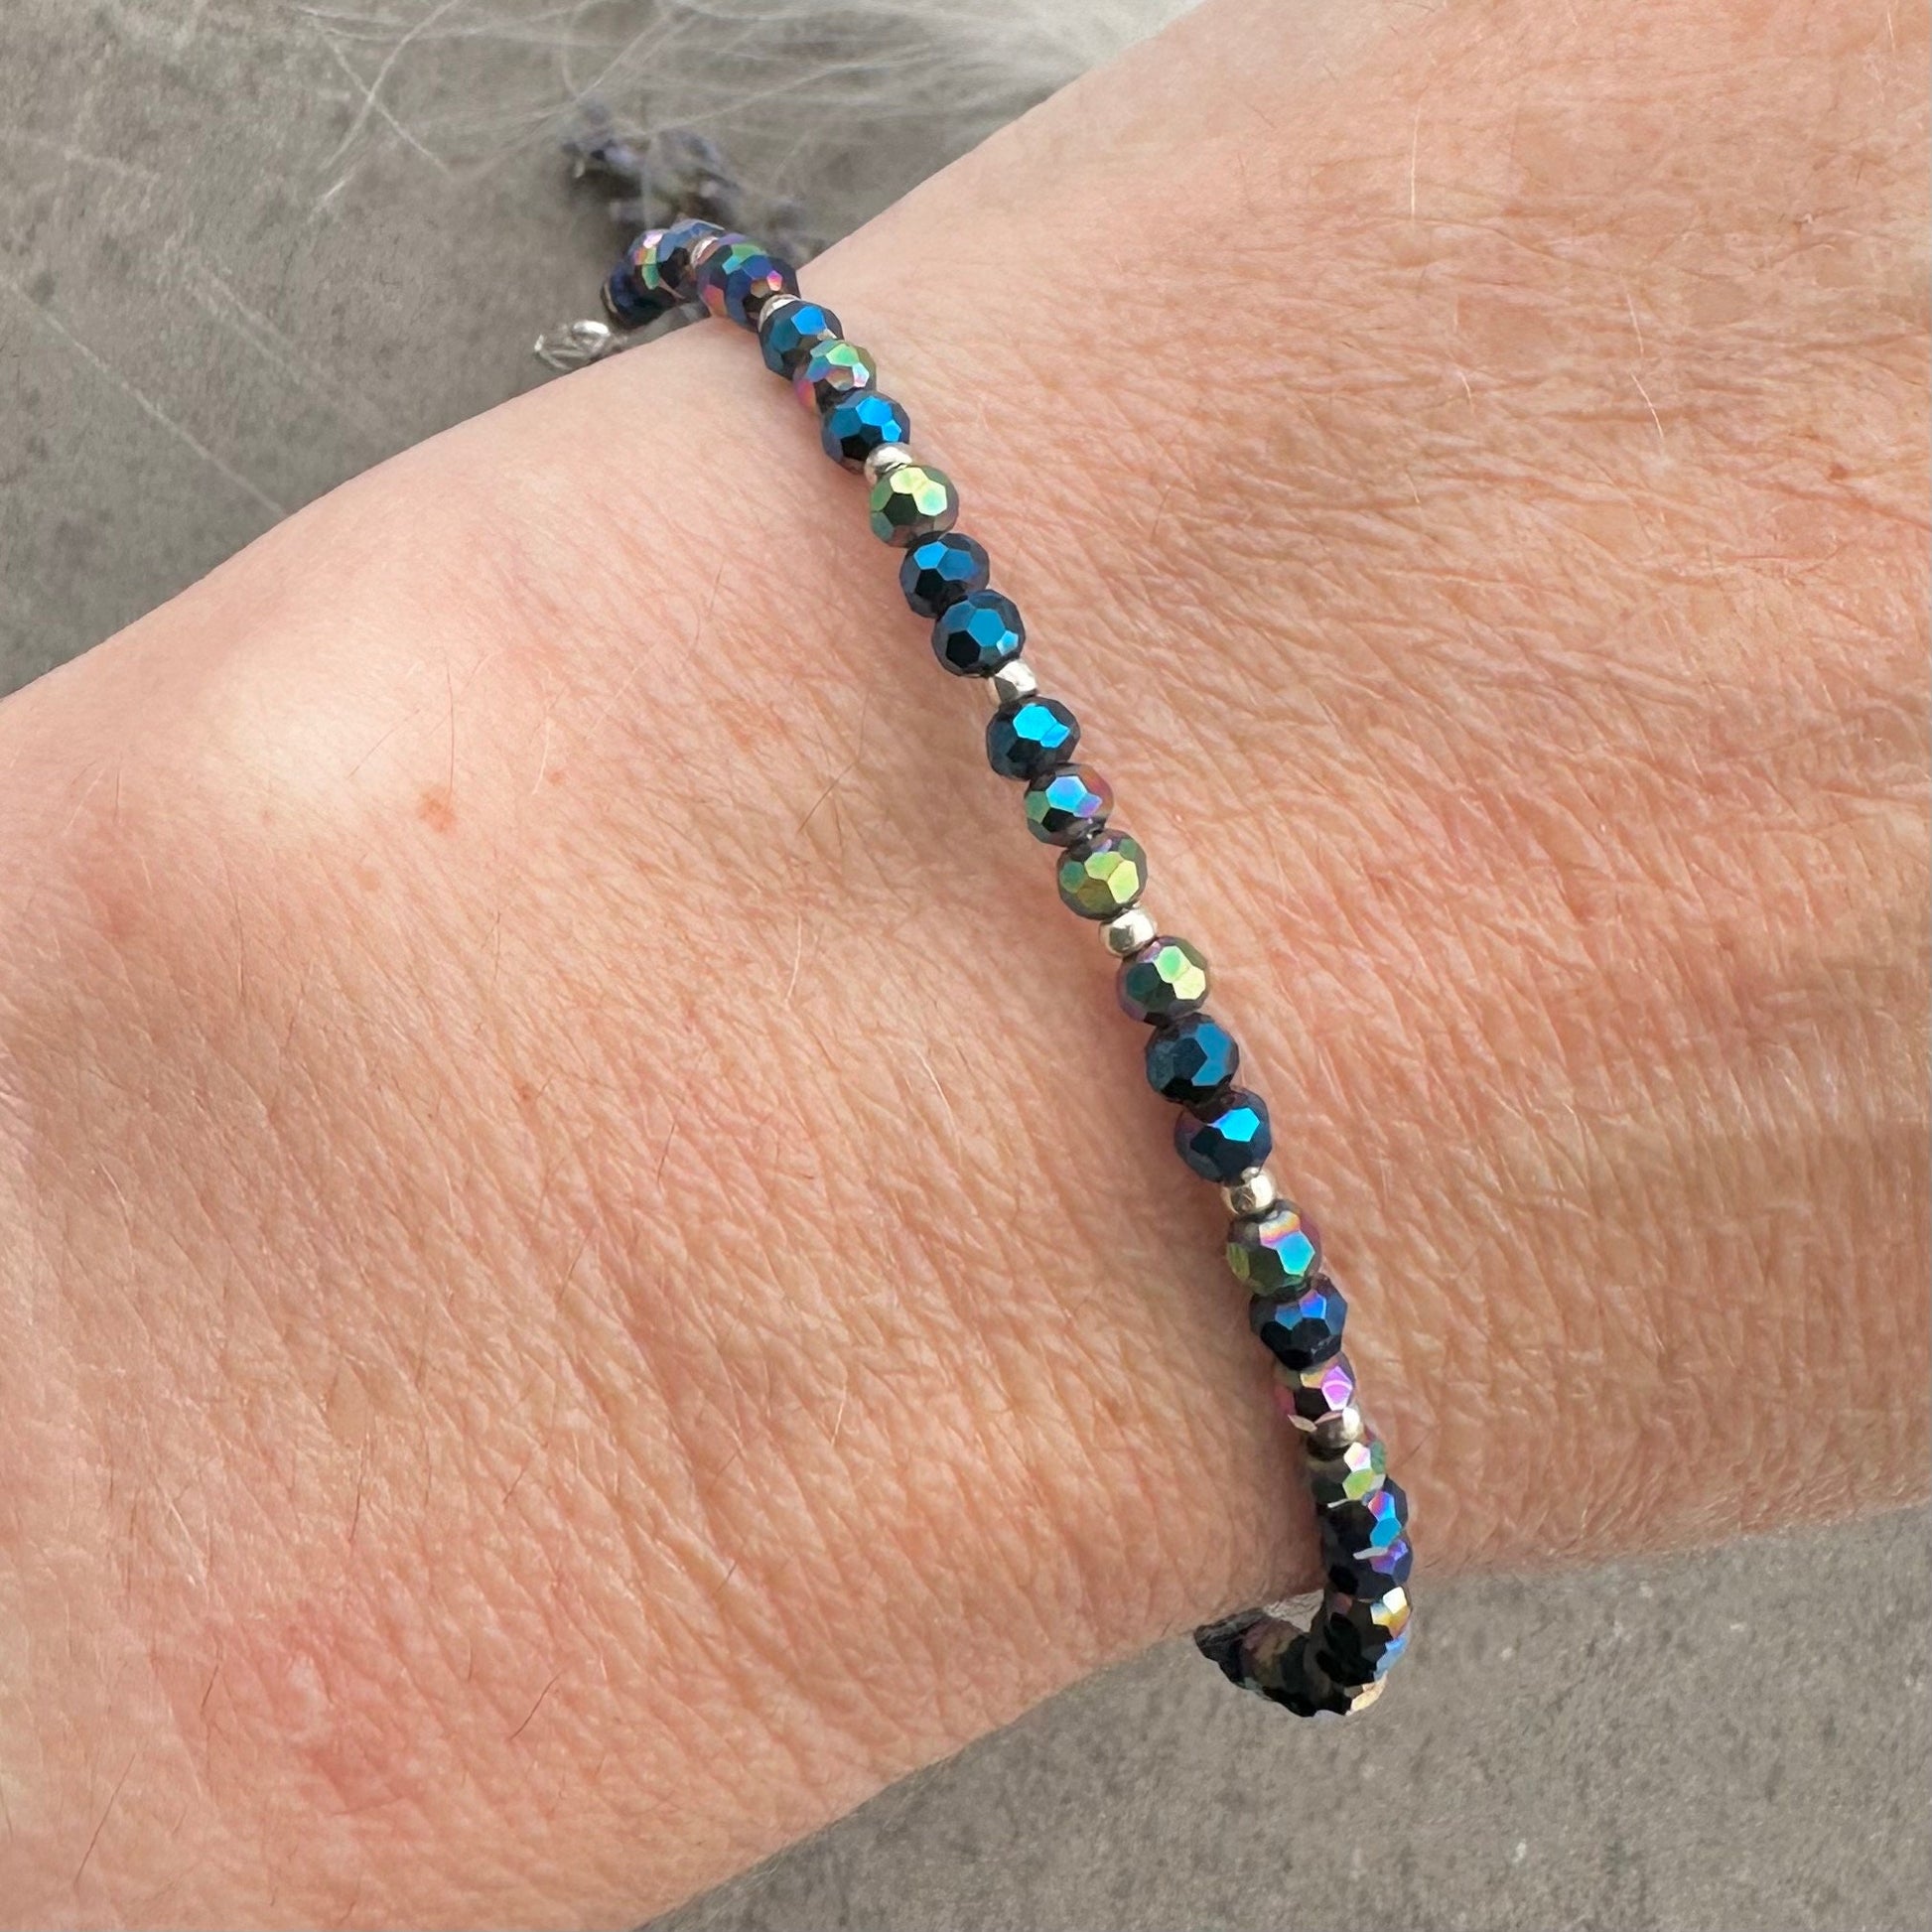 Blue Sparkly Bracelet with glass beads and seed beads